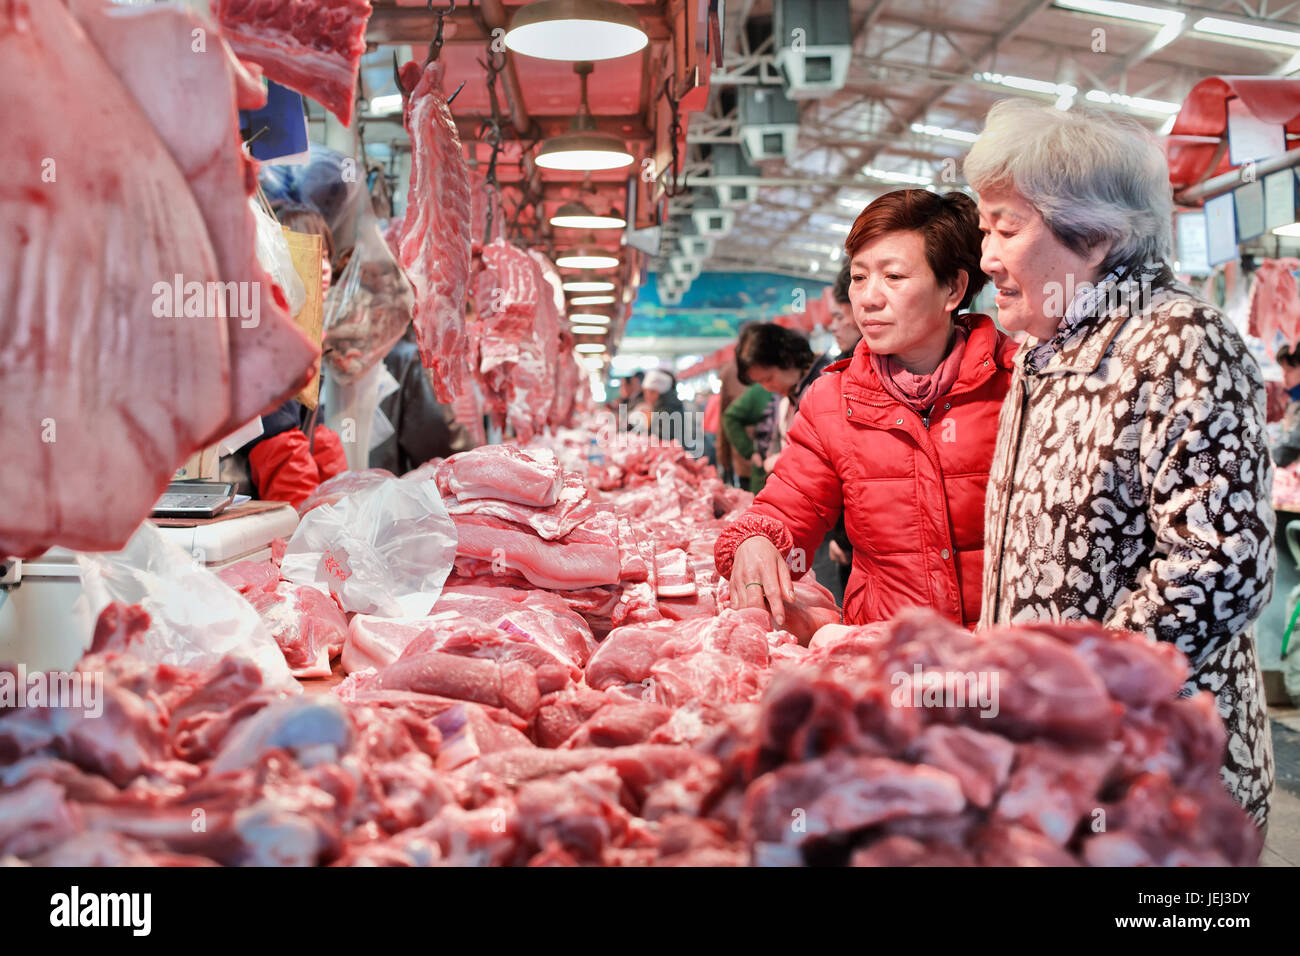 BEIJING-MARCH 14. Dongjiao indoor meat market. There are still many traditional indoor markets in many Chinese cities. Stock Photo